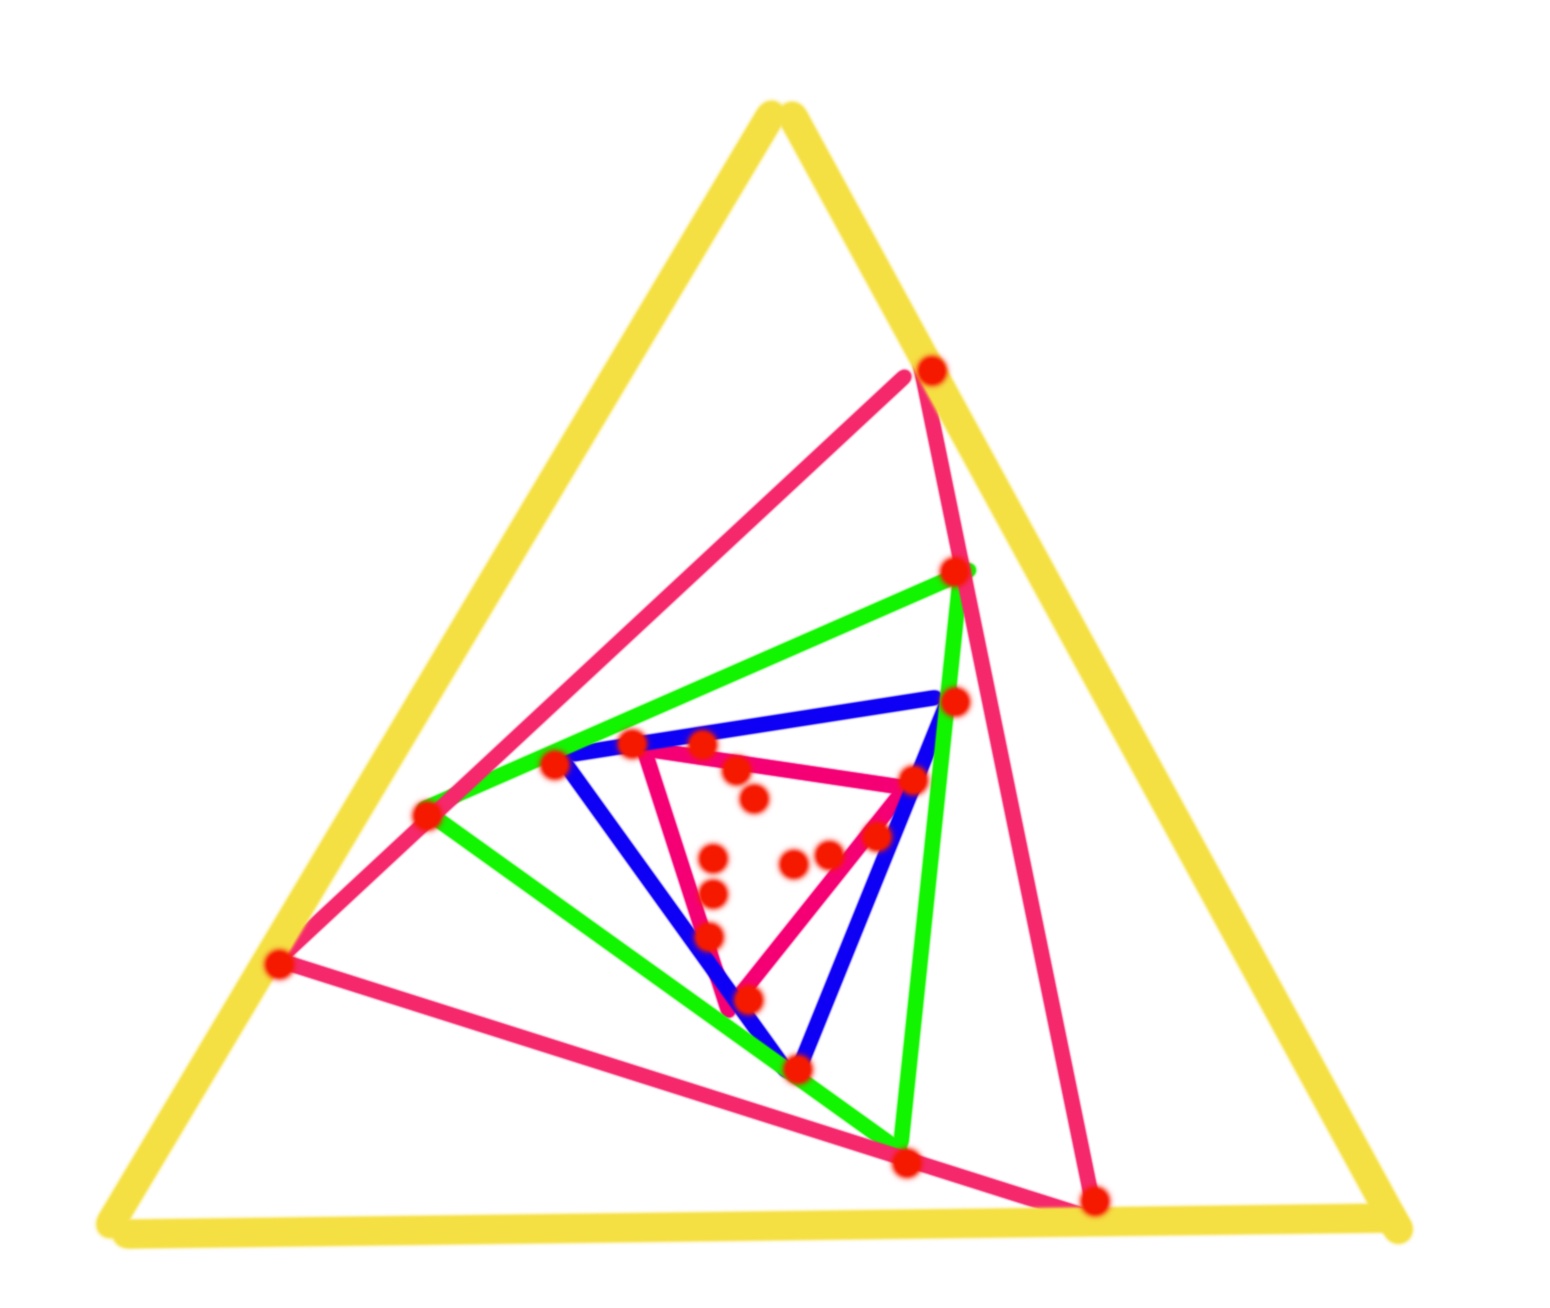 Open source triangle